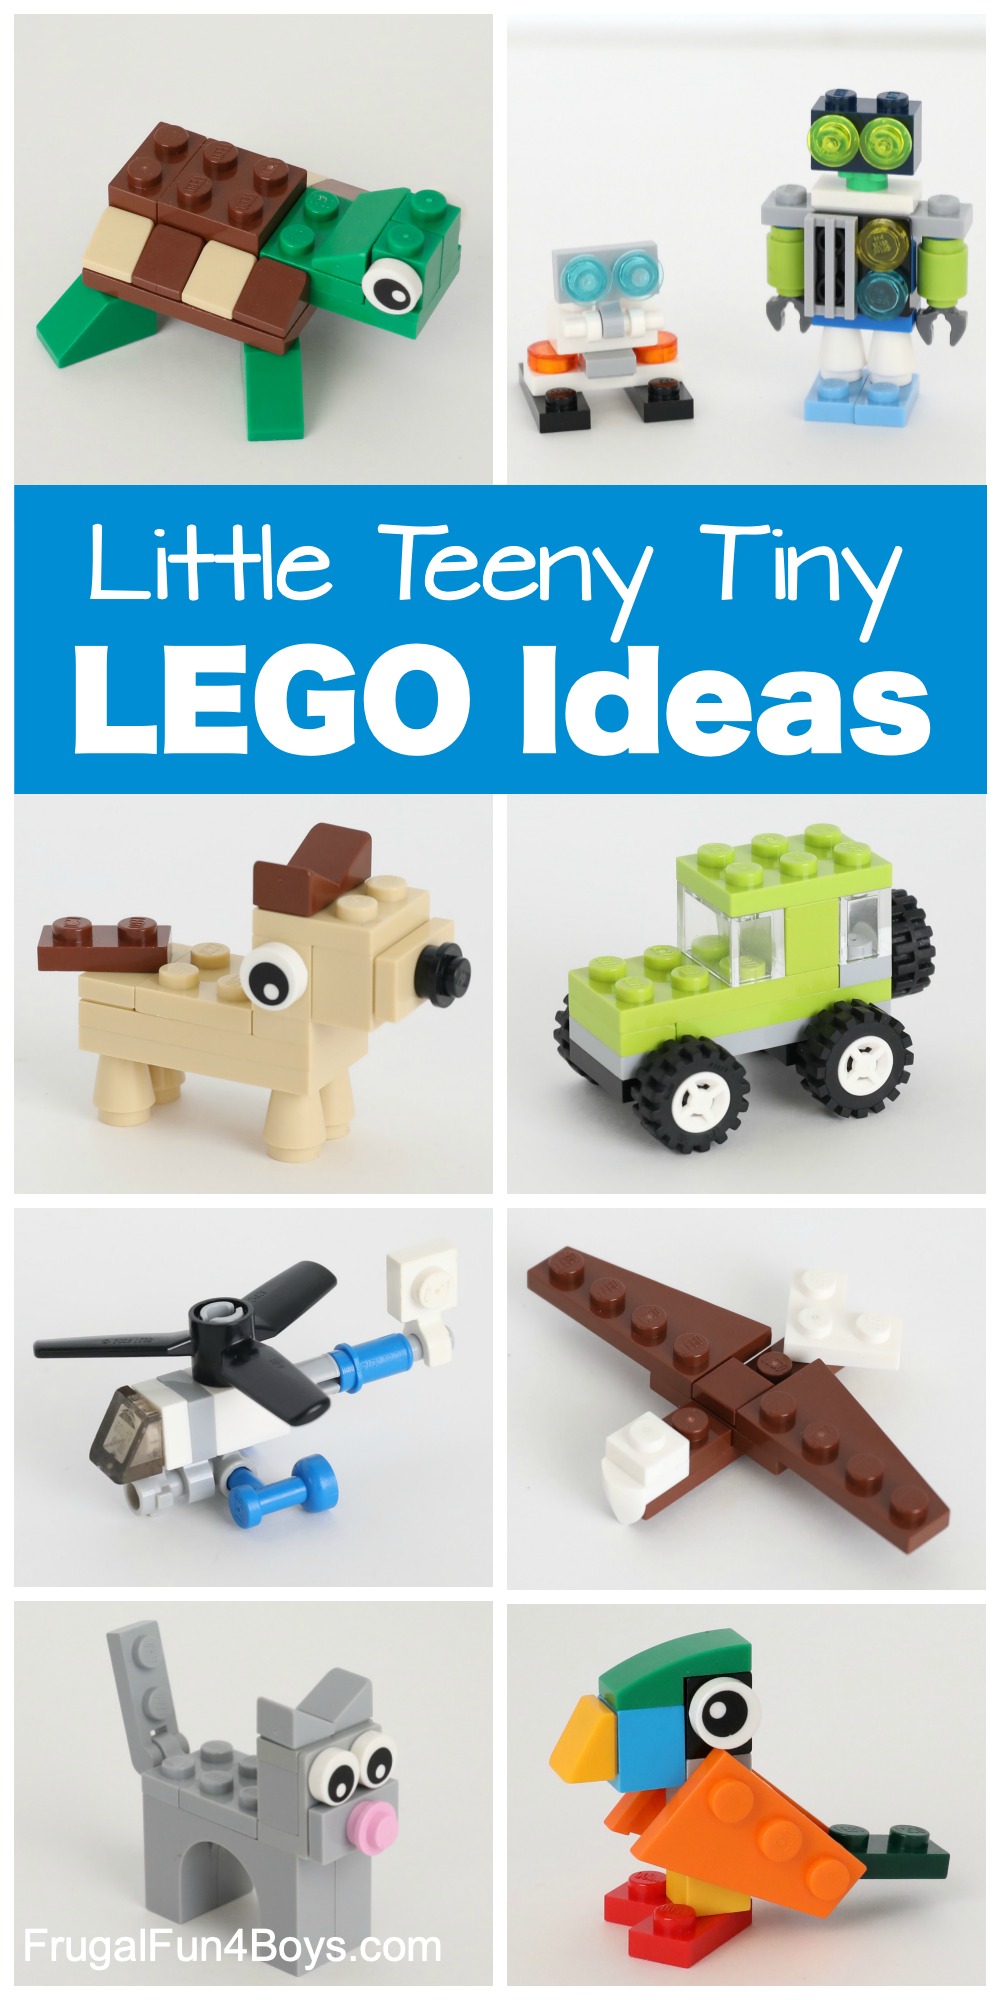 Teeny Tiny Mini Projects to Build - Frugal Fun For Boys and Girls